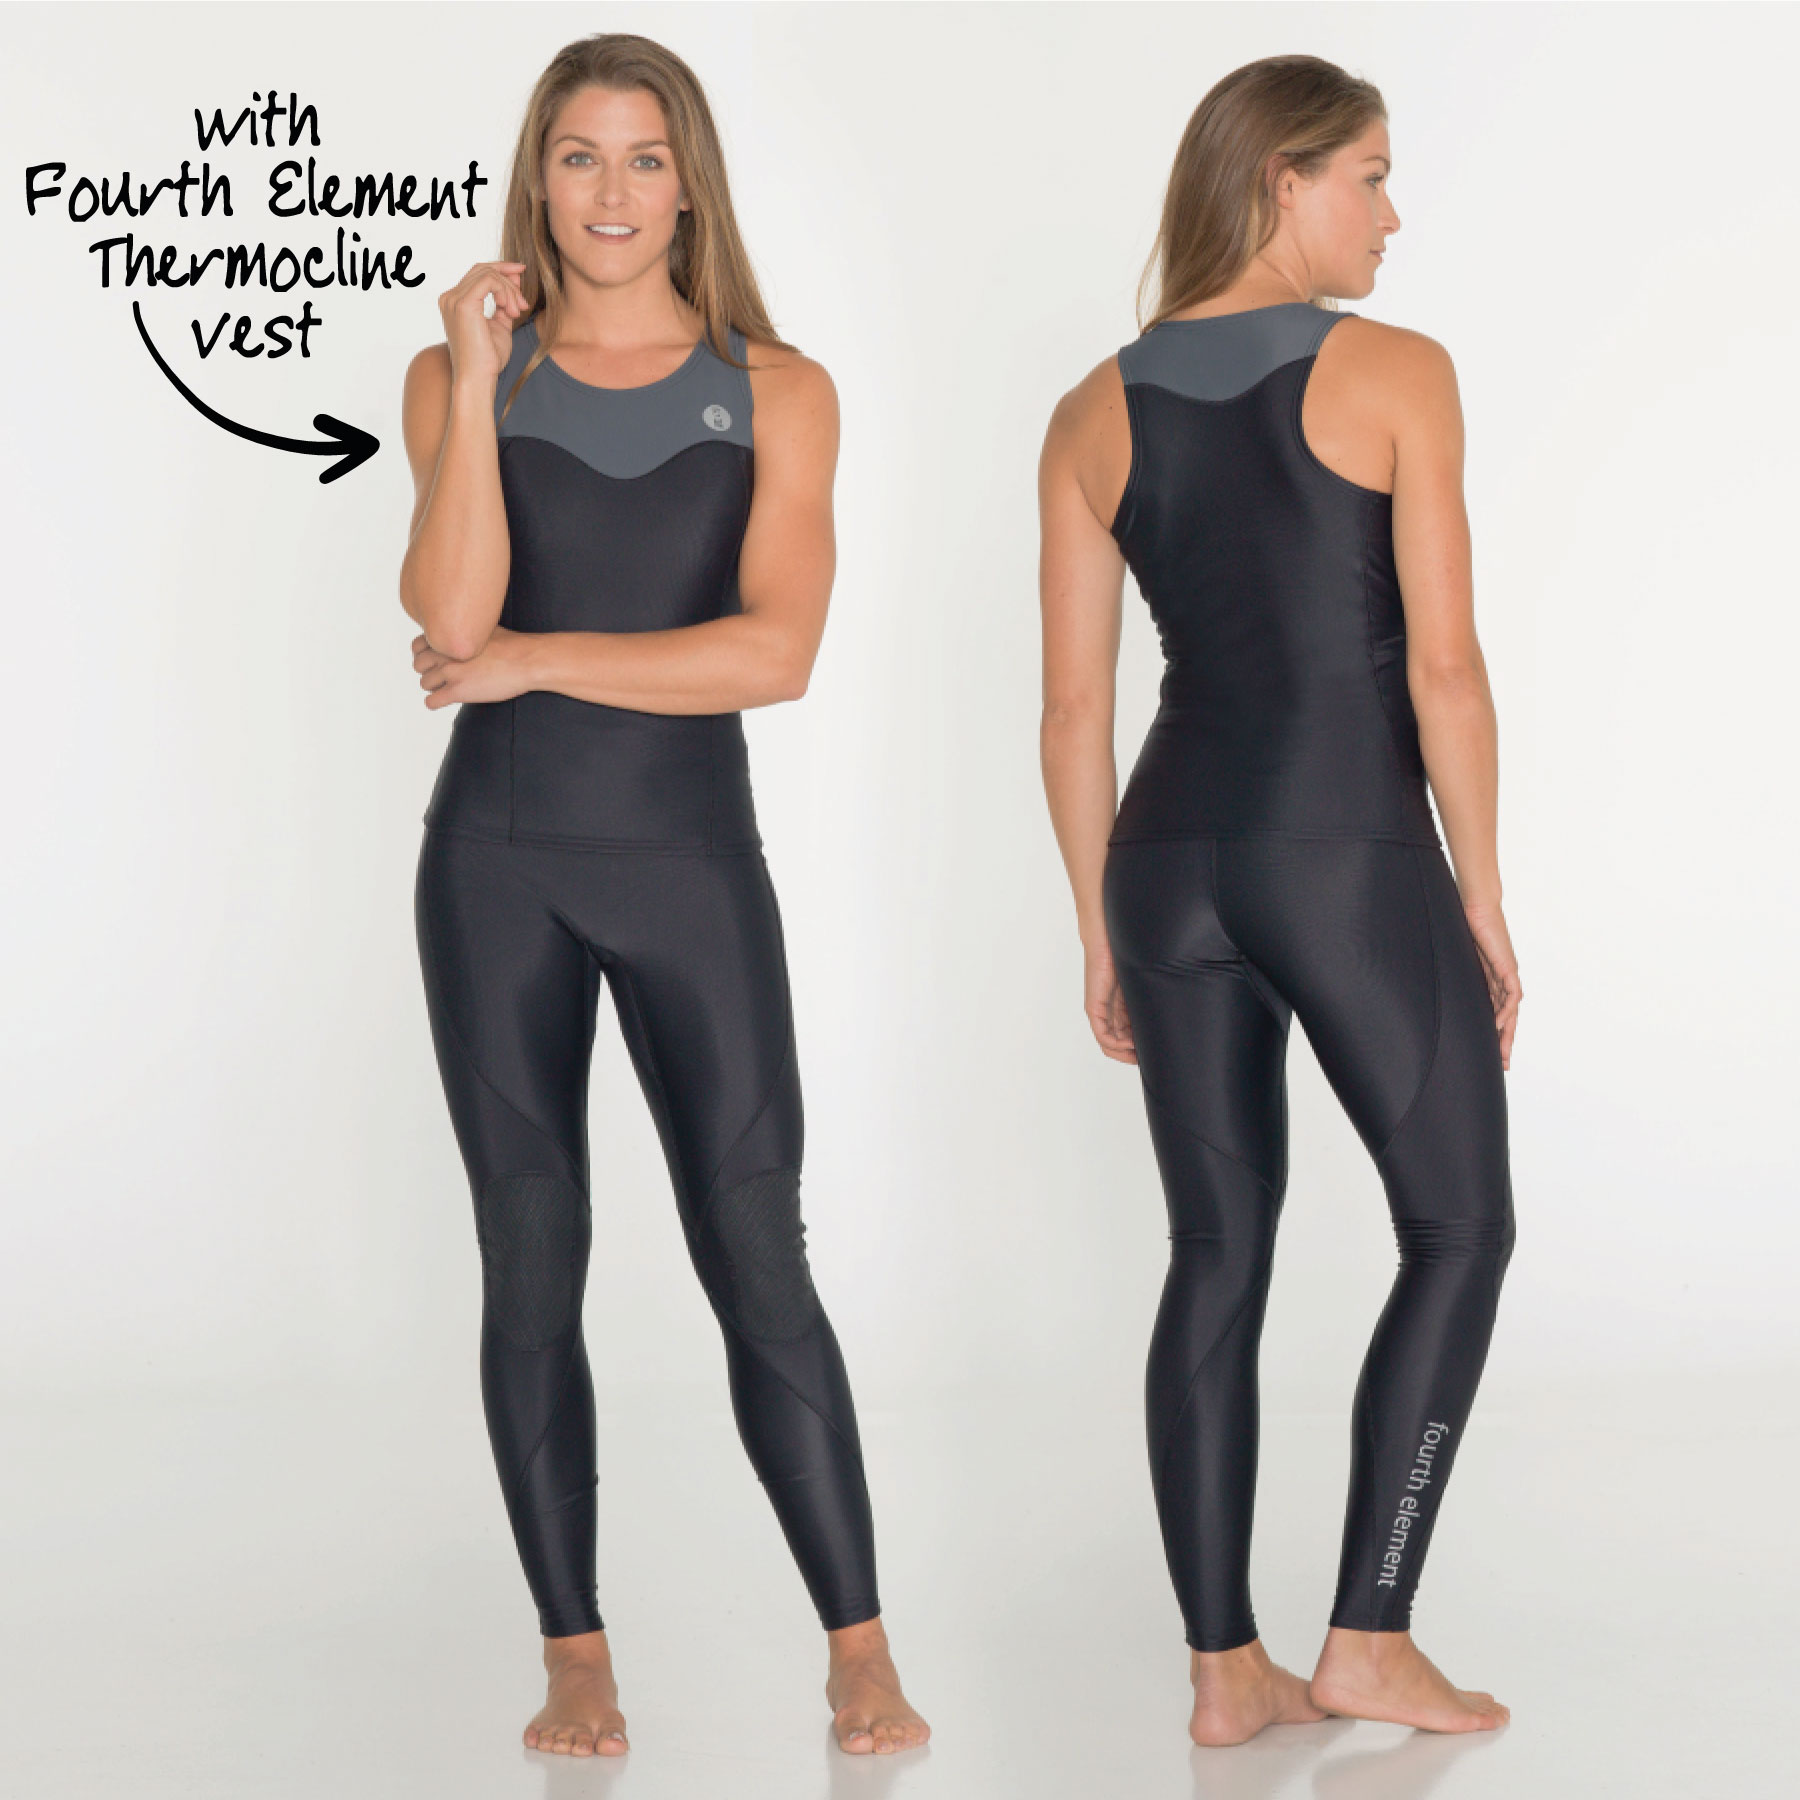 Fourth Element Thermocline Leggings